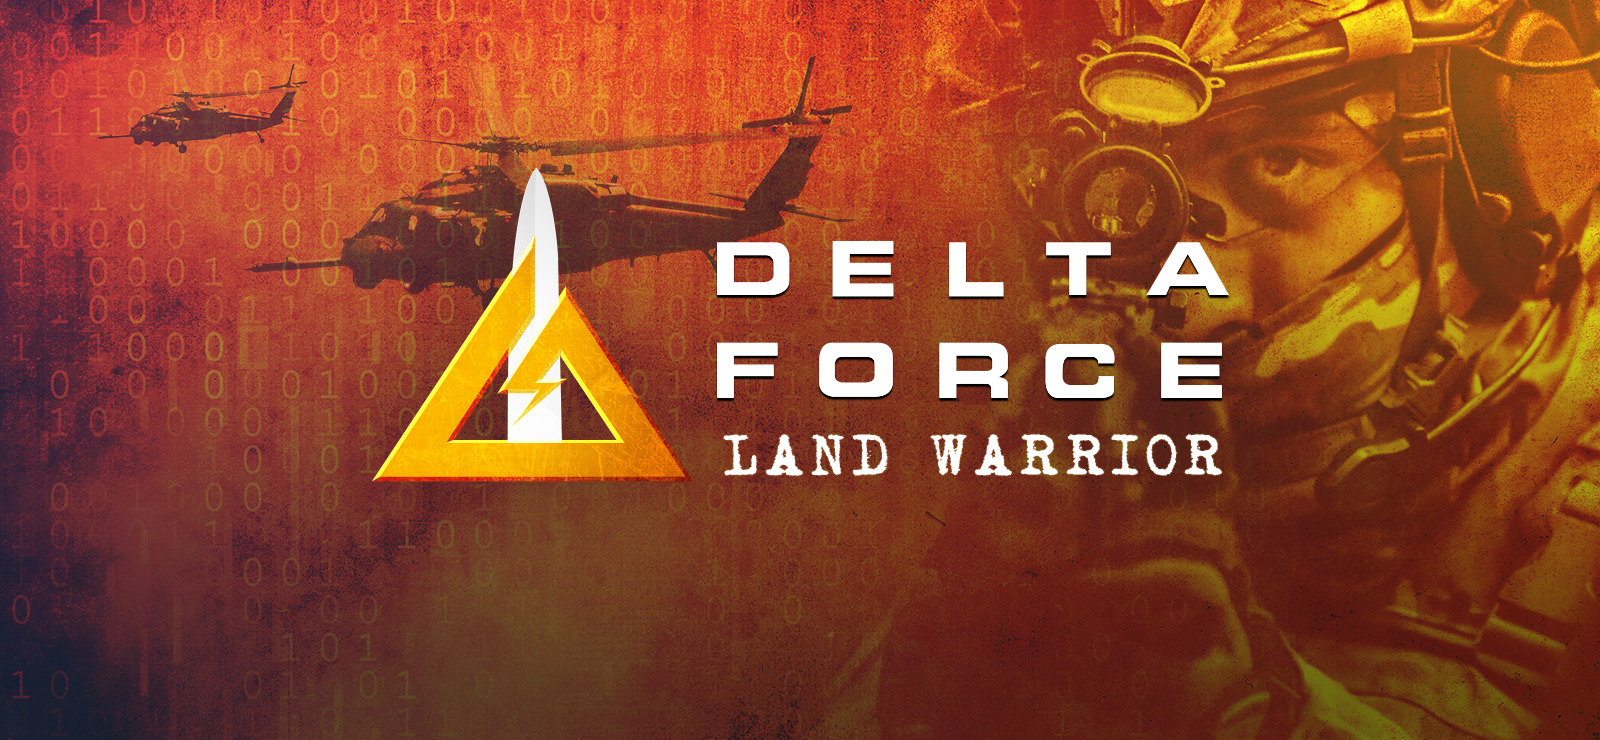 delta force 3 game free full version